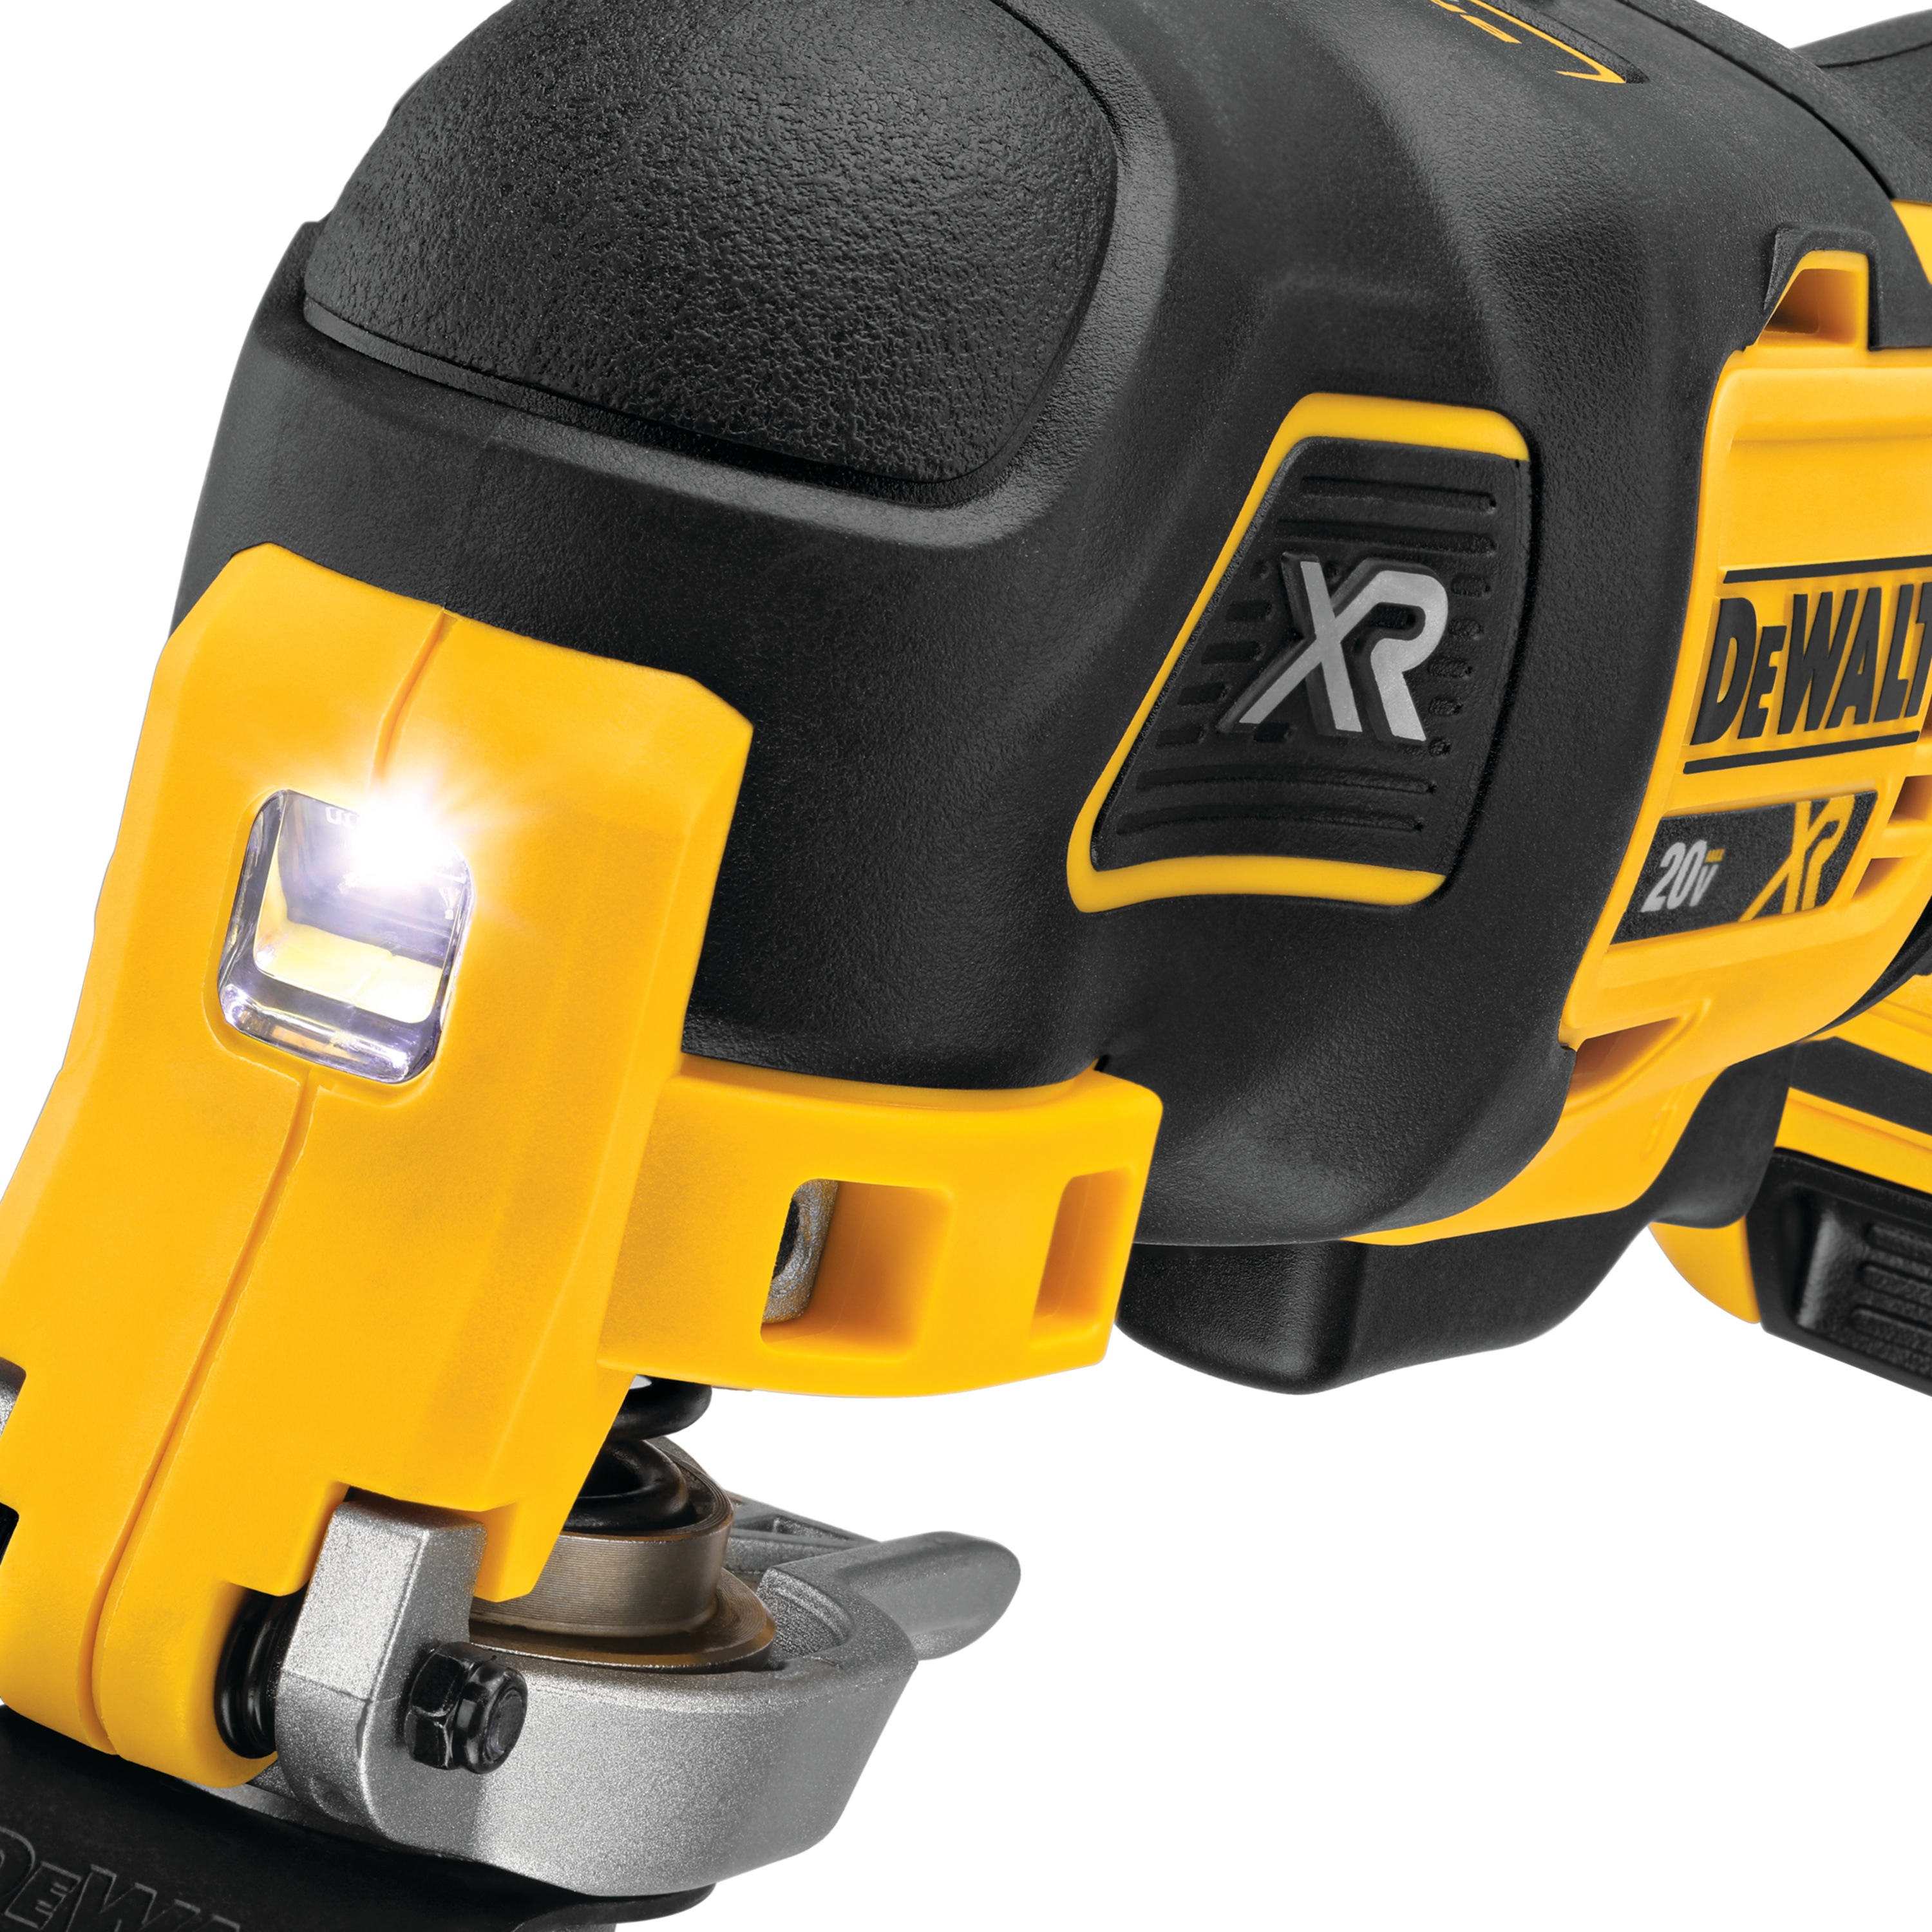 LED feature of XR Cordless Oscillating Multi Tool 